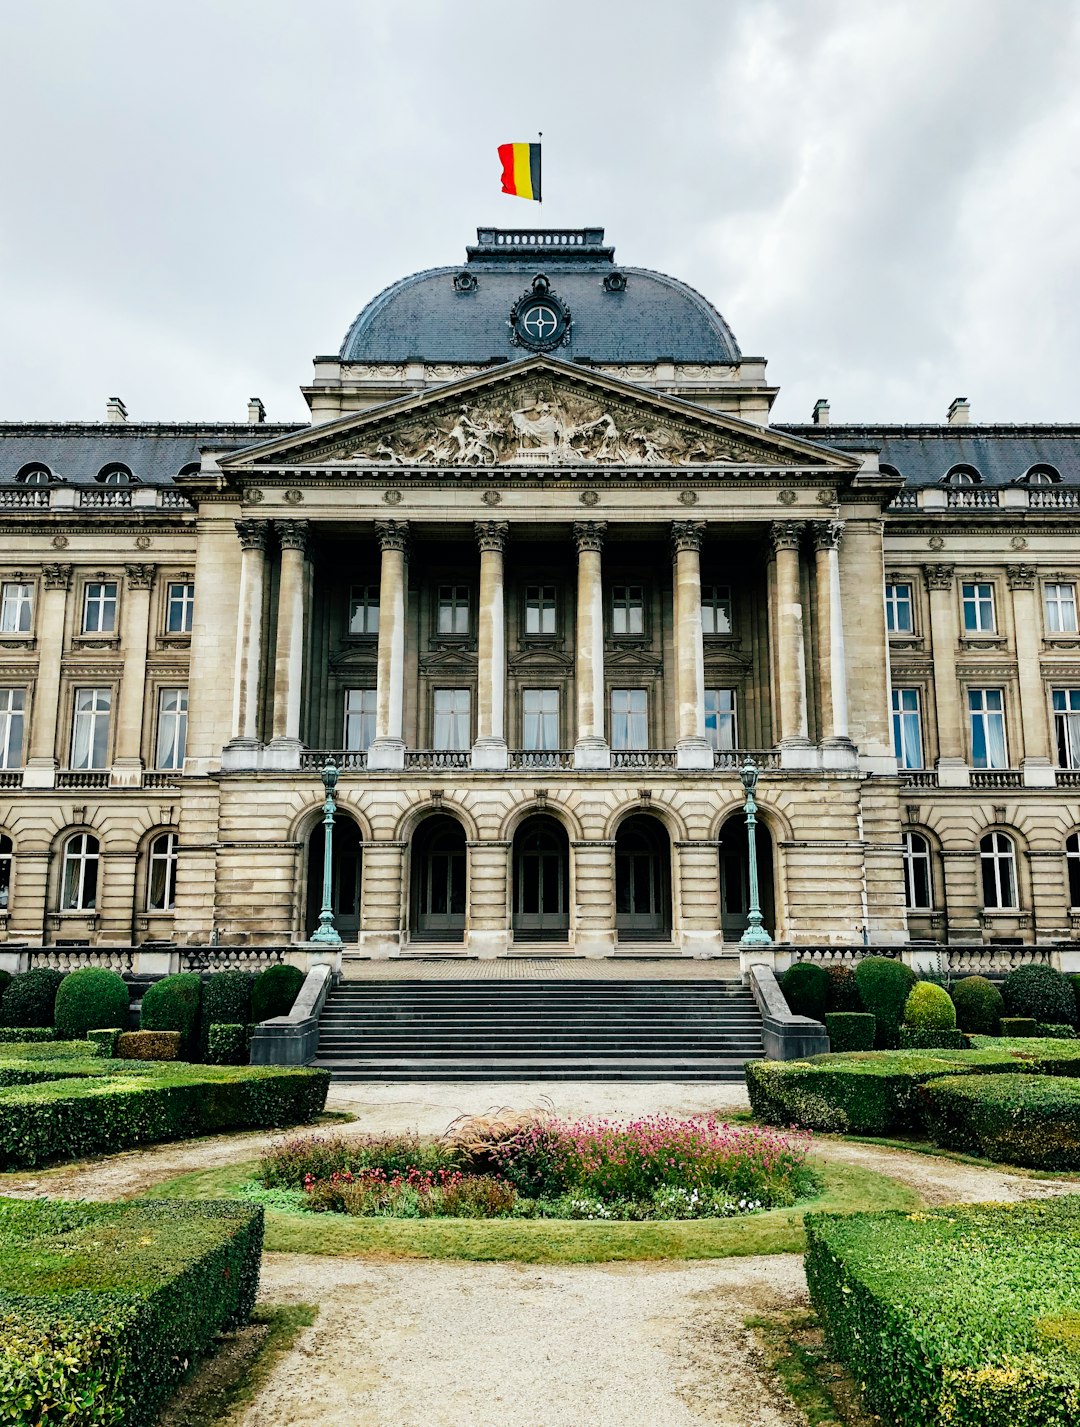 Travel Tips and Stories of Royal Palace of Brussels in Belgium